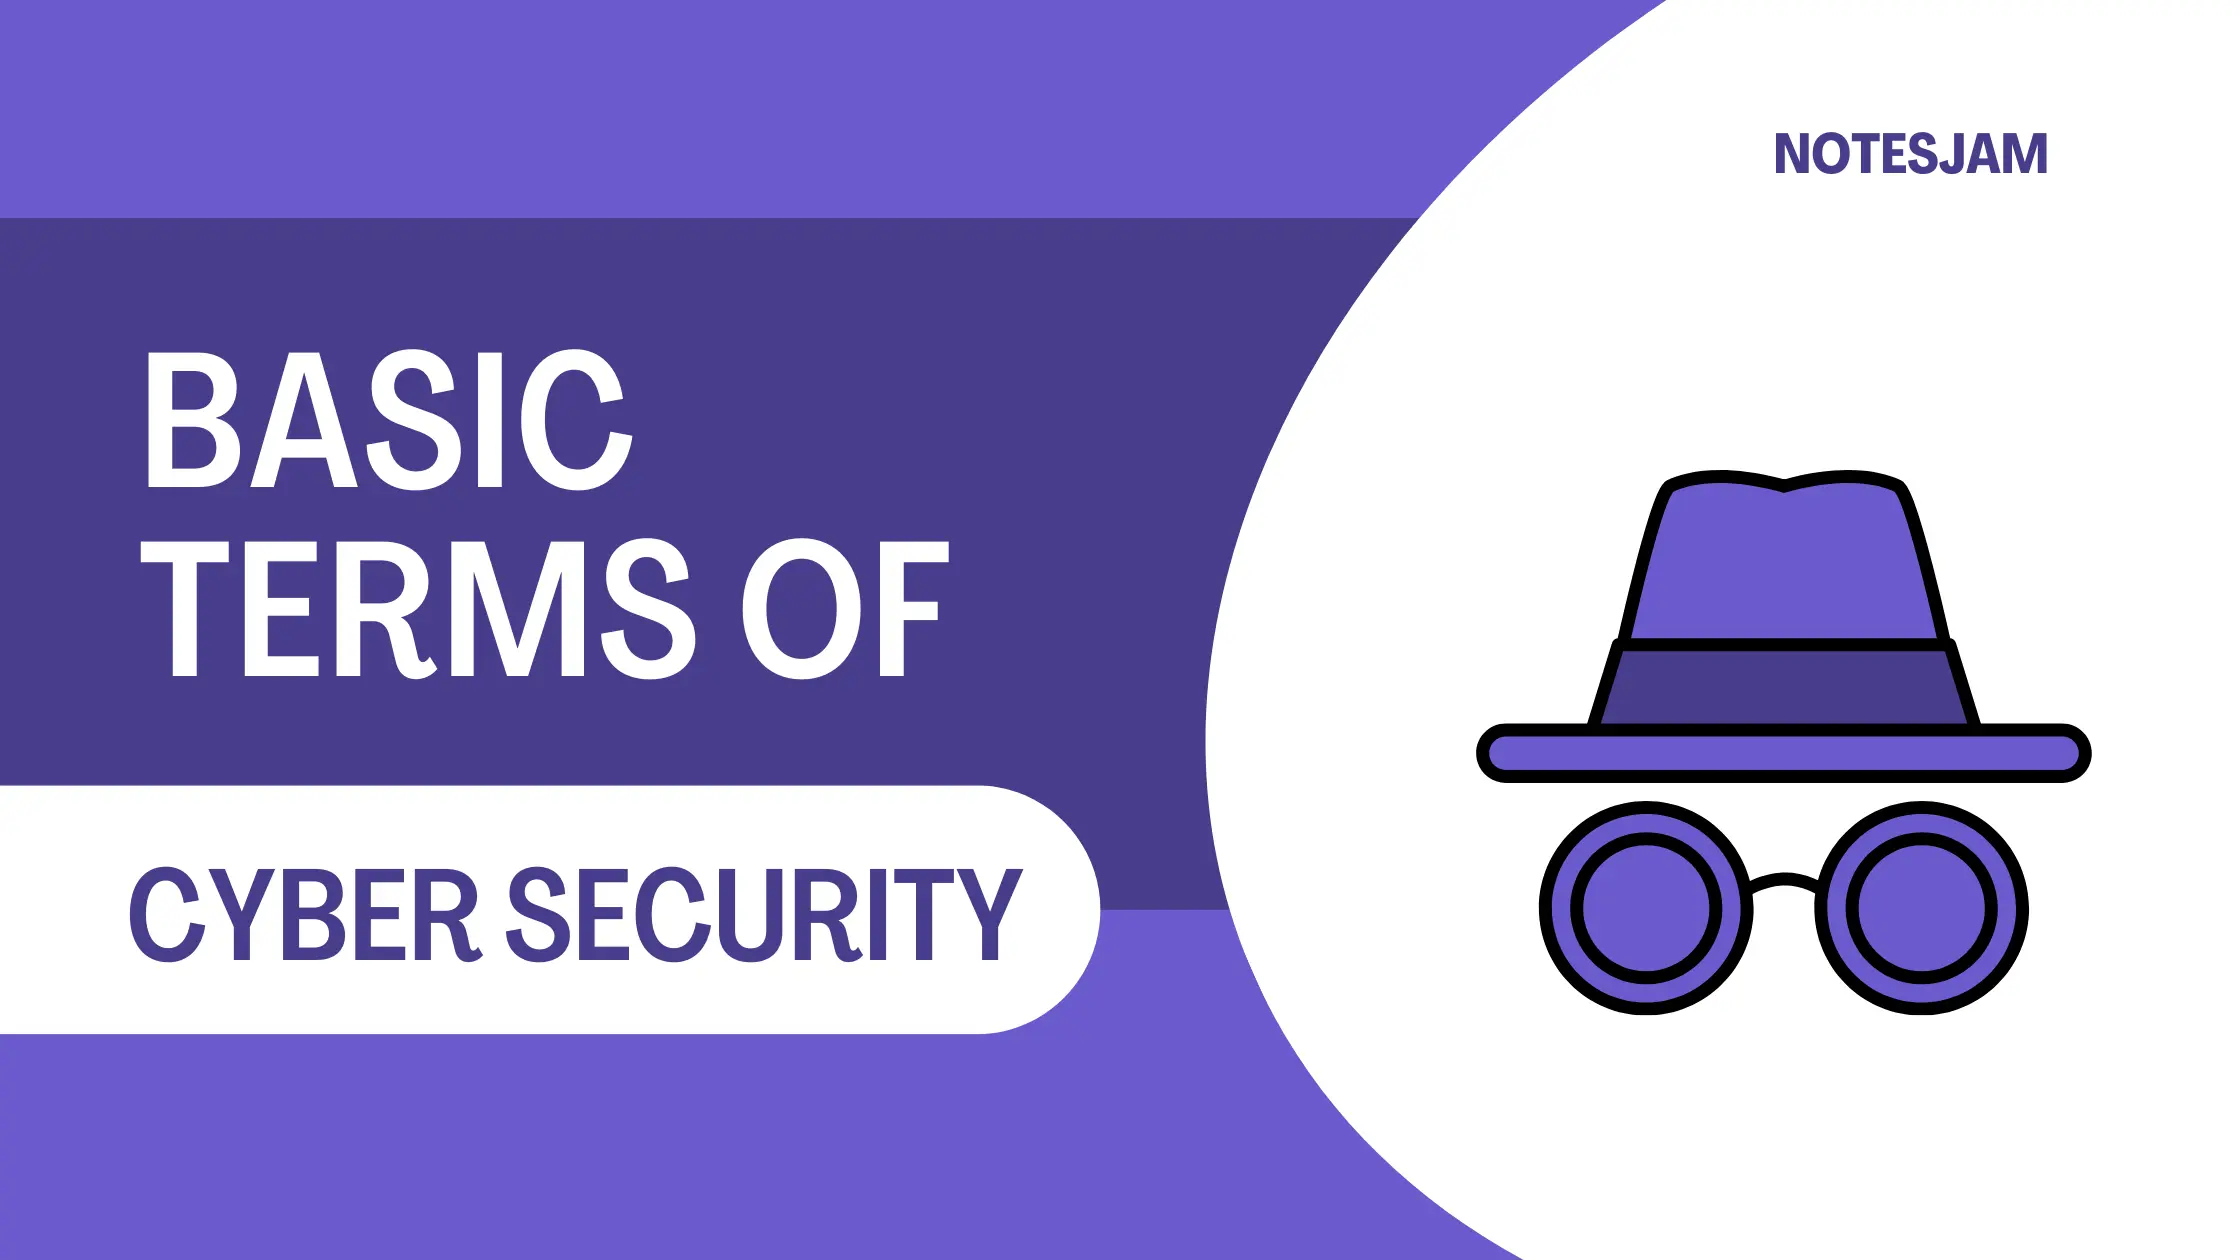 Basic terms of Cybersecurity